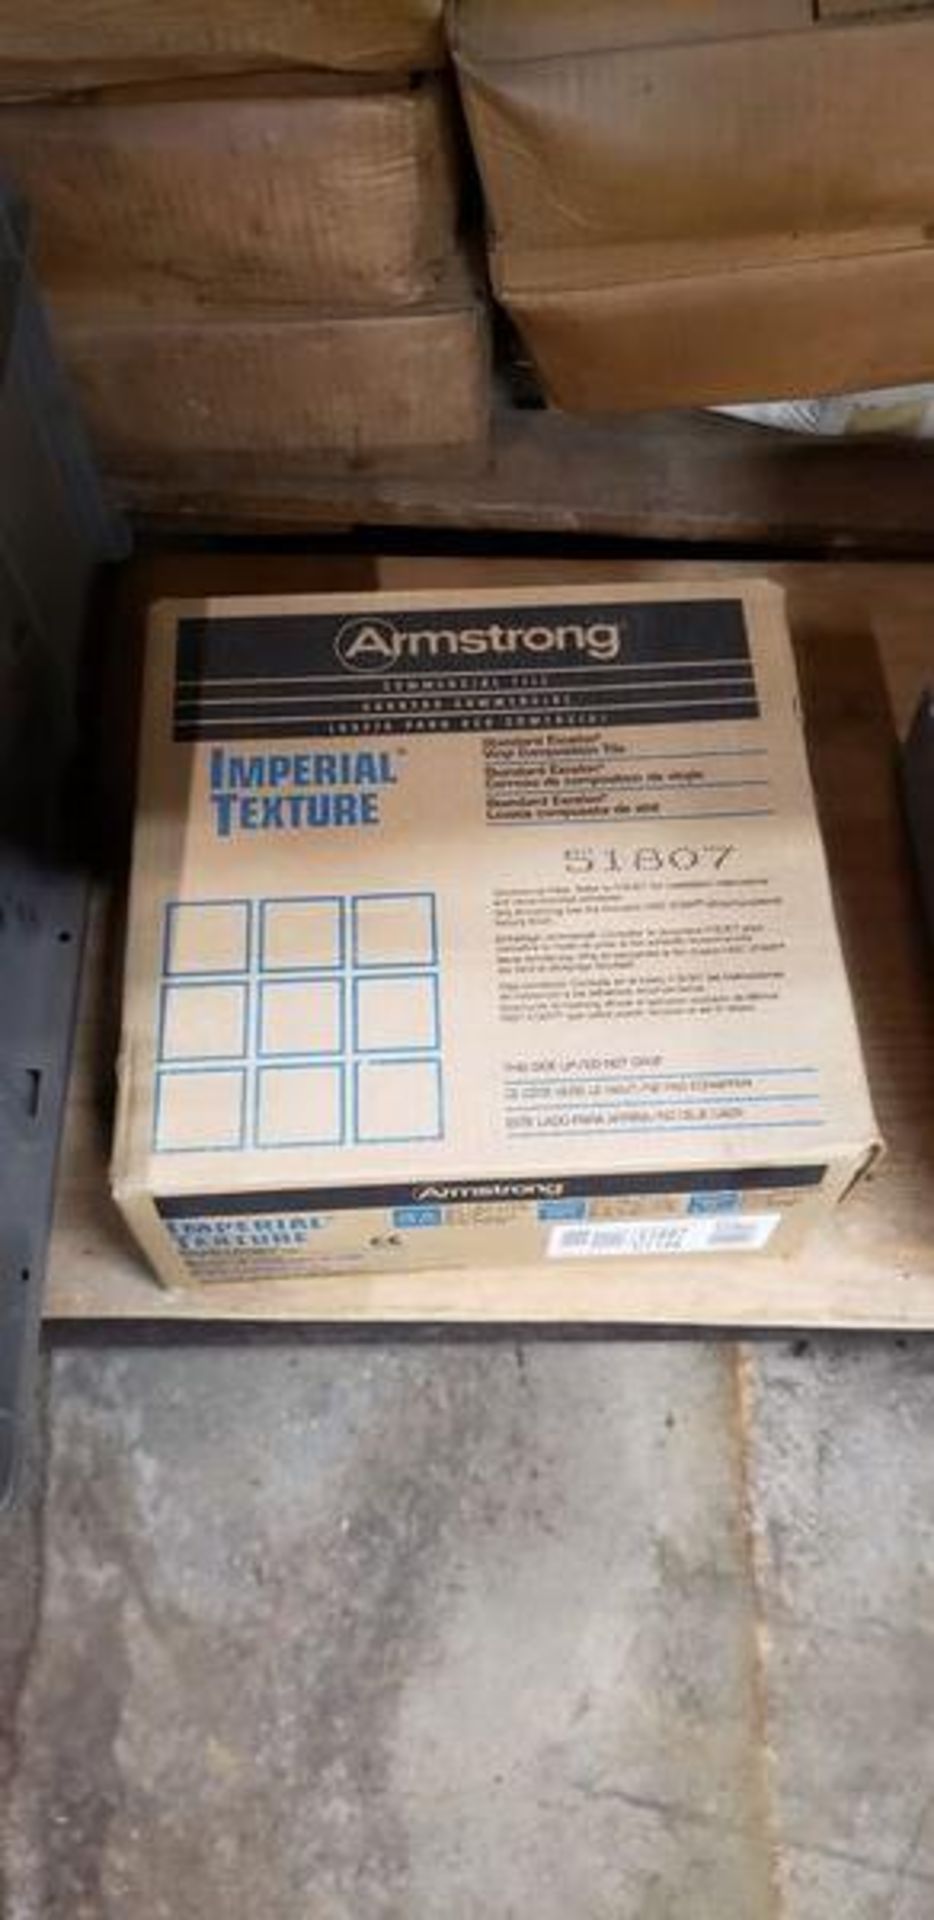 CASE OF ARMSTRONG VINYL COMPOSITION TILE 12" SHADOW BLUE